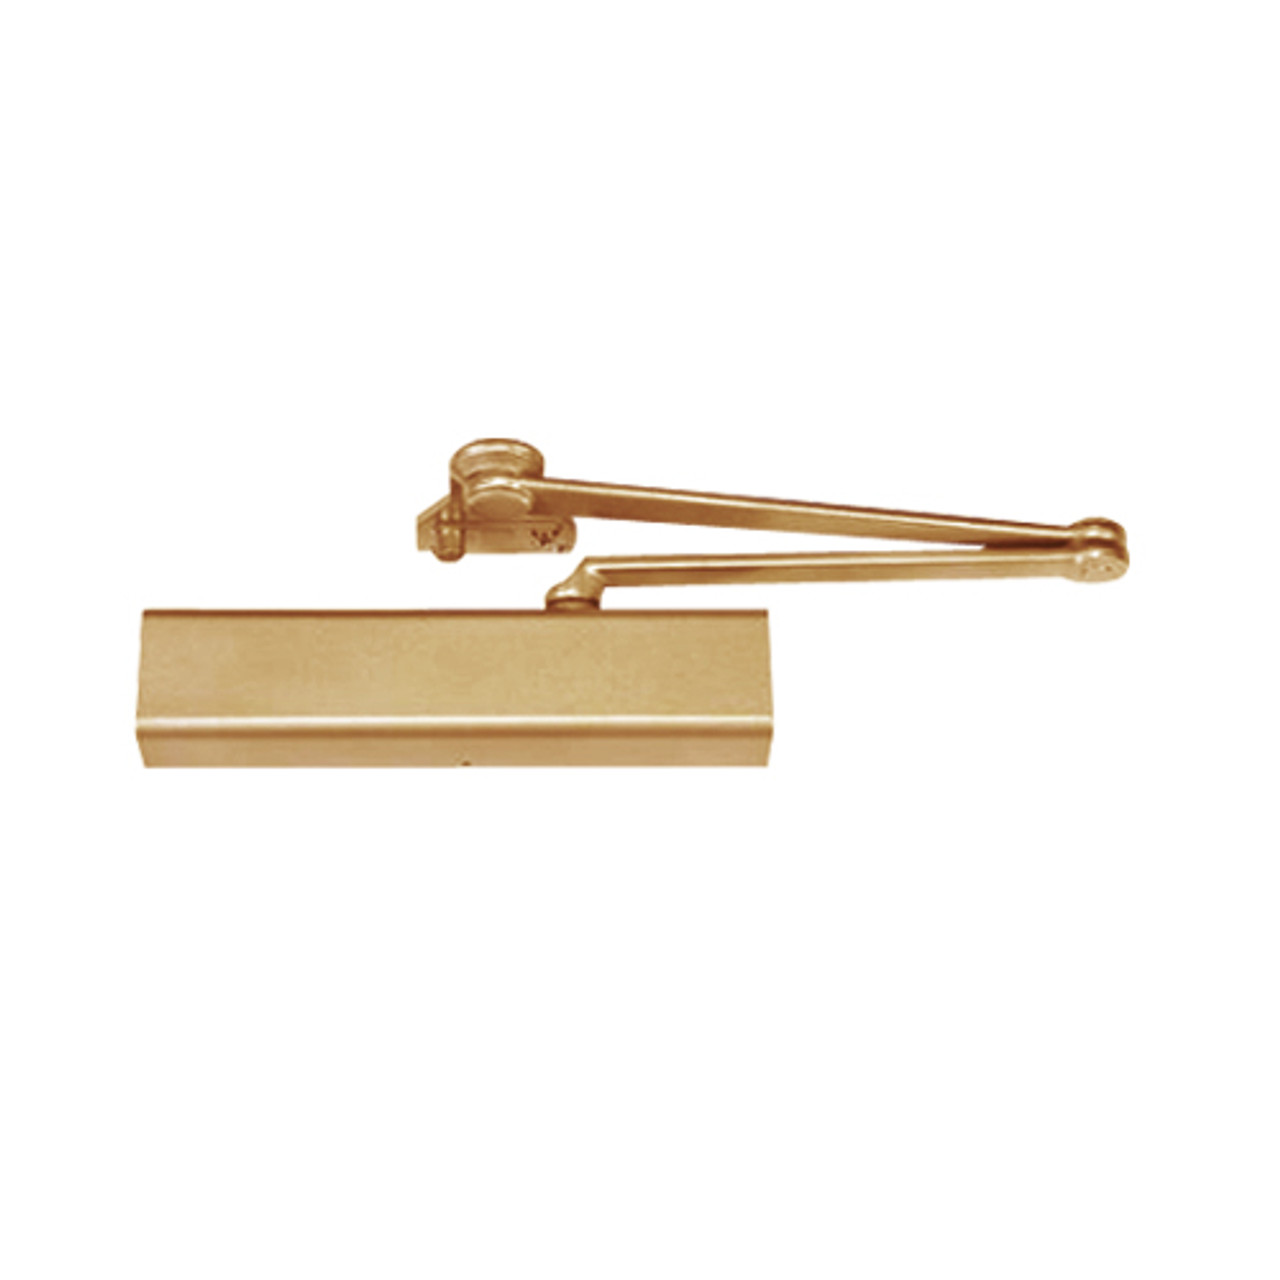 CLP8501TM-691 Norton 8000 Series Full Cover Hold Open Door Closers with CloserPlus Arm in Dull Bronze Finish